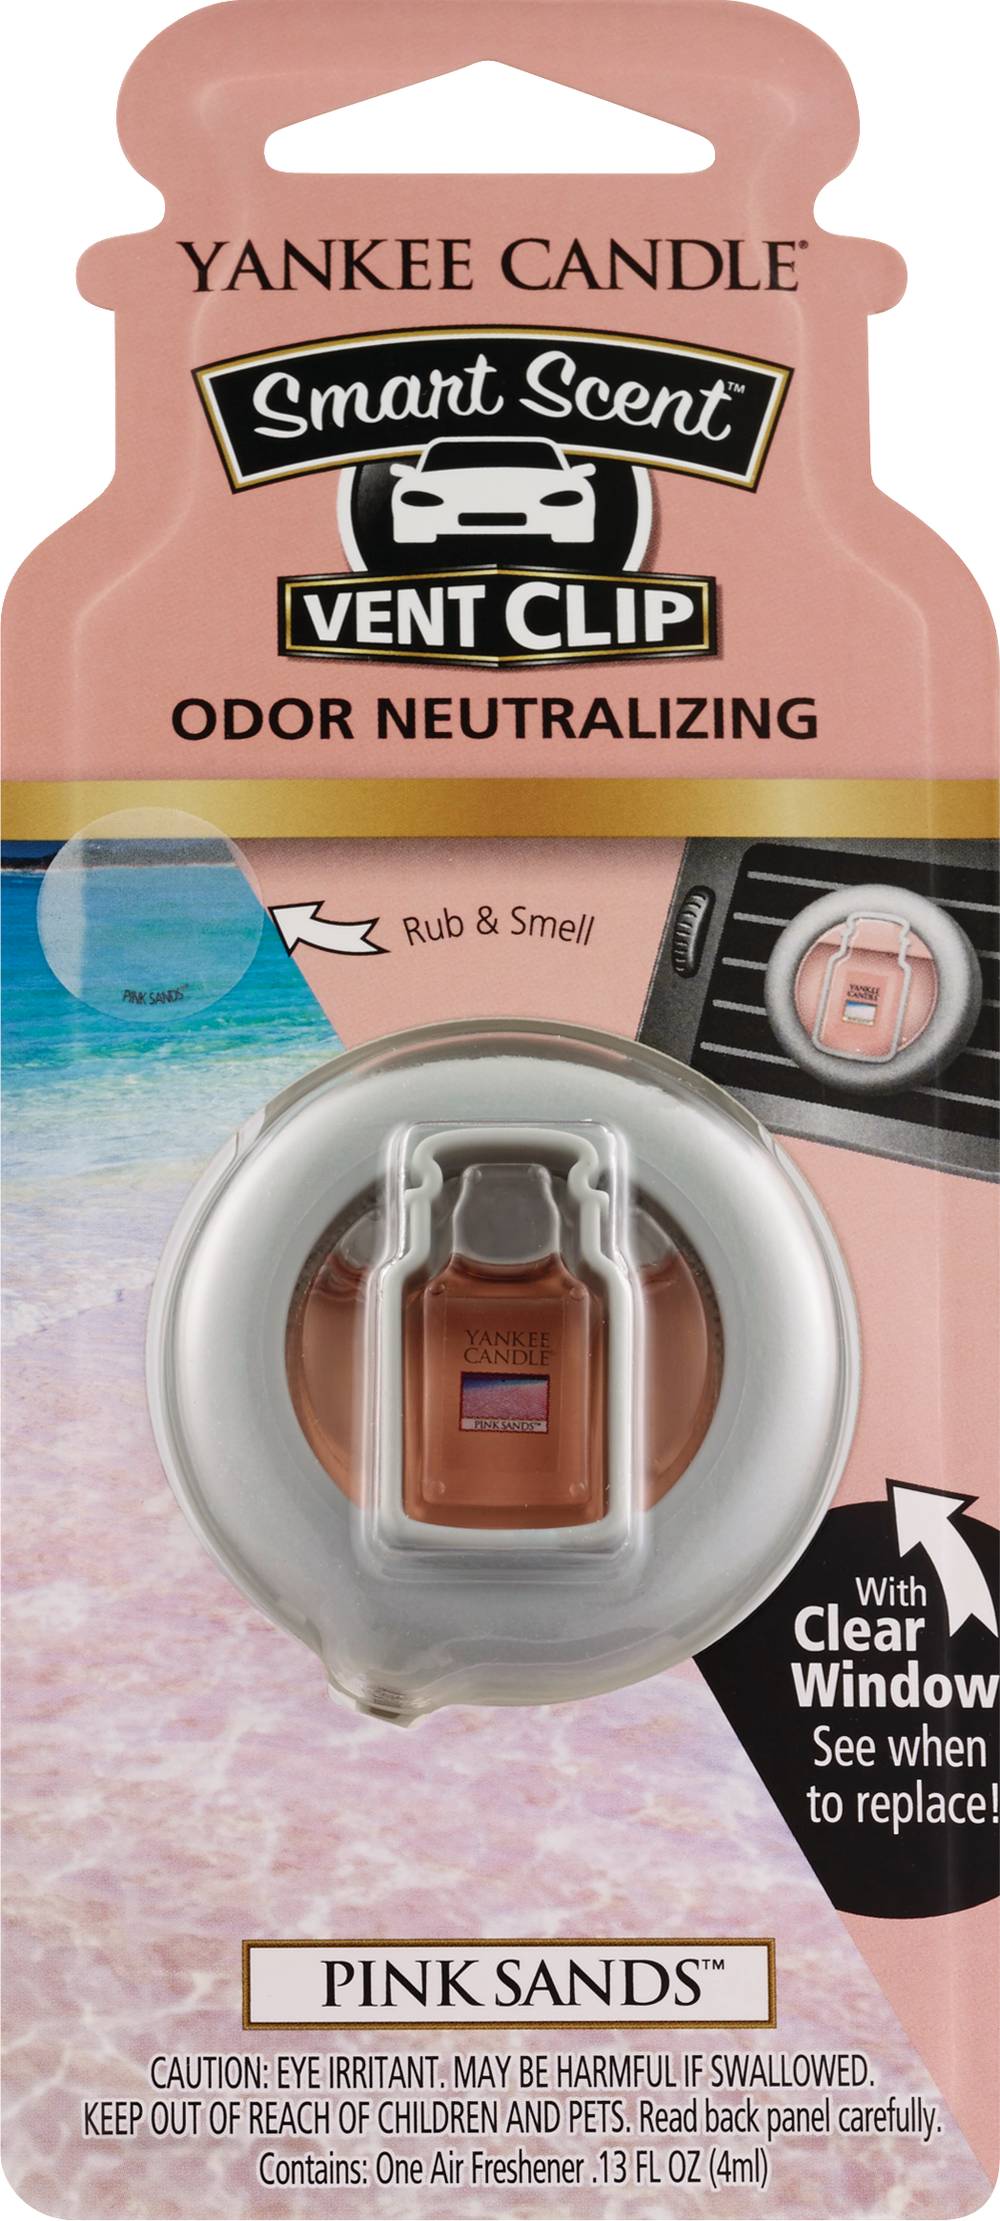 Yankee Candle Smart Scent Odor Neutralizing Car Vent Clip